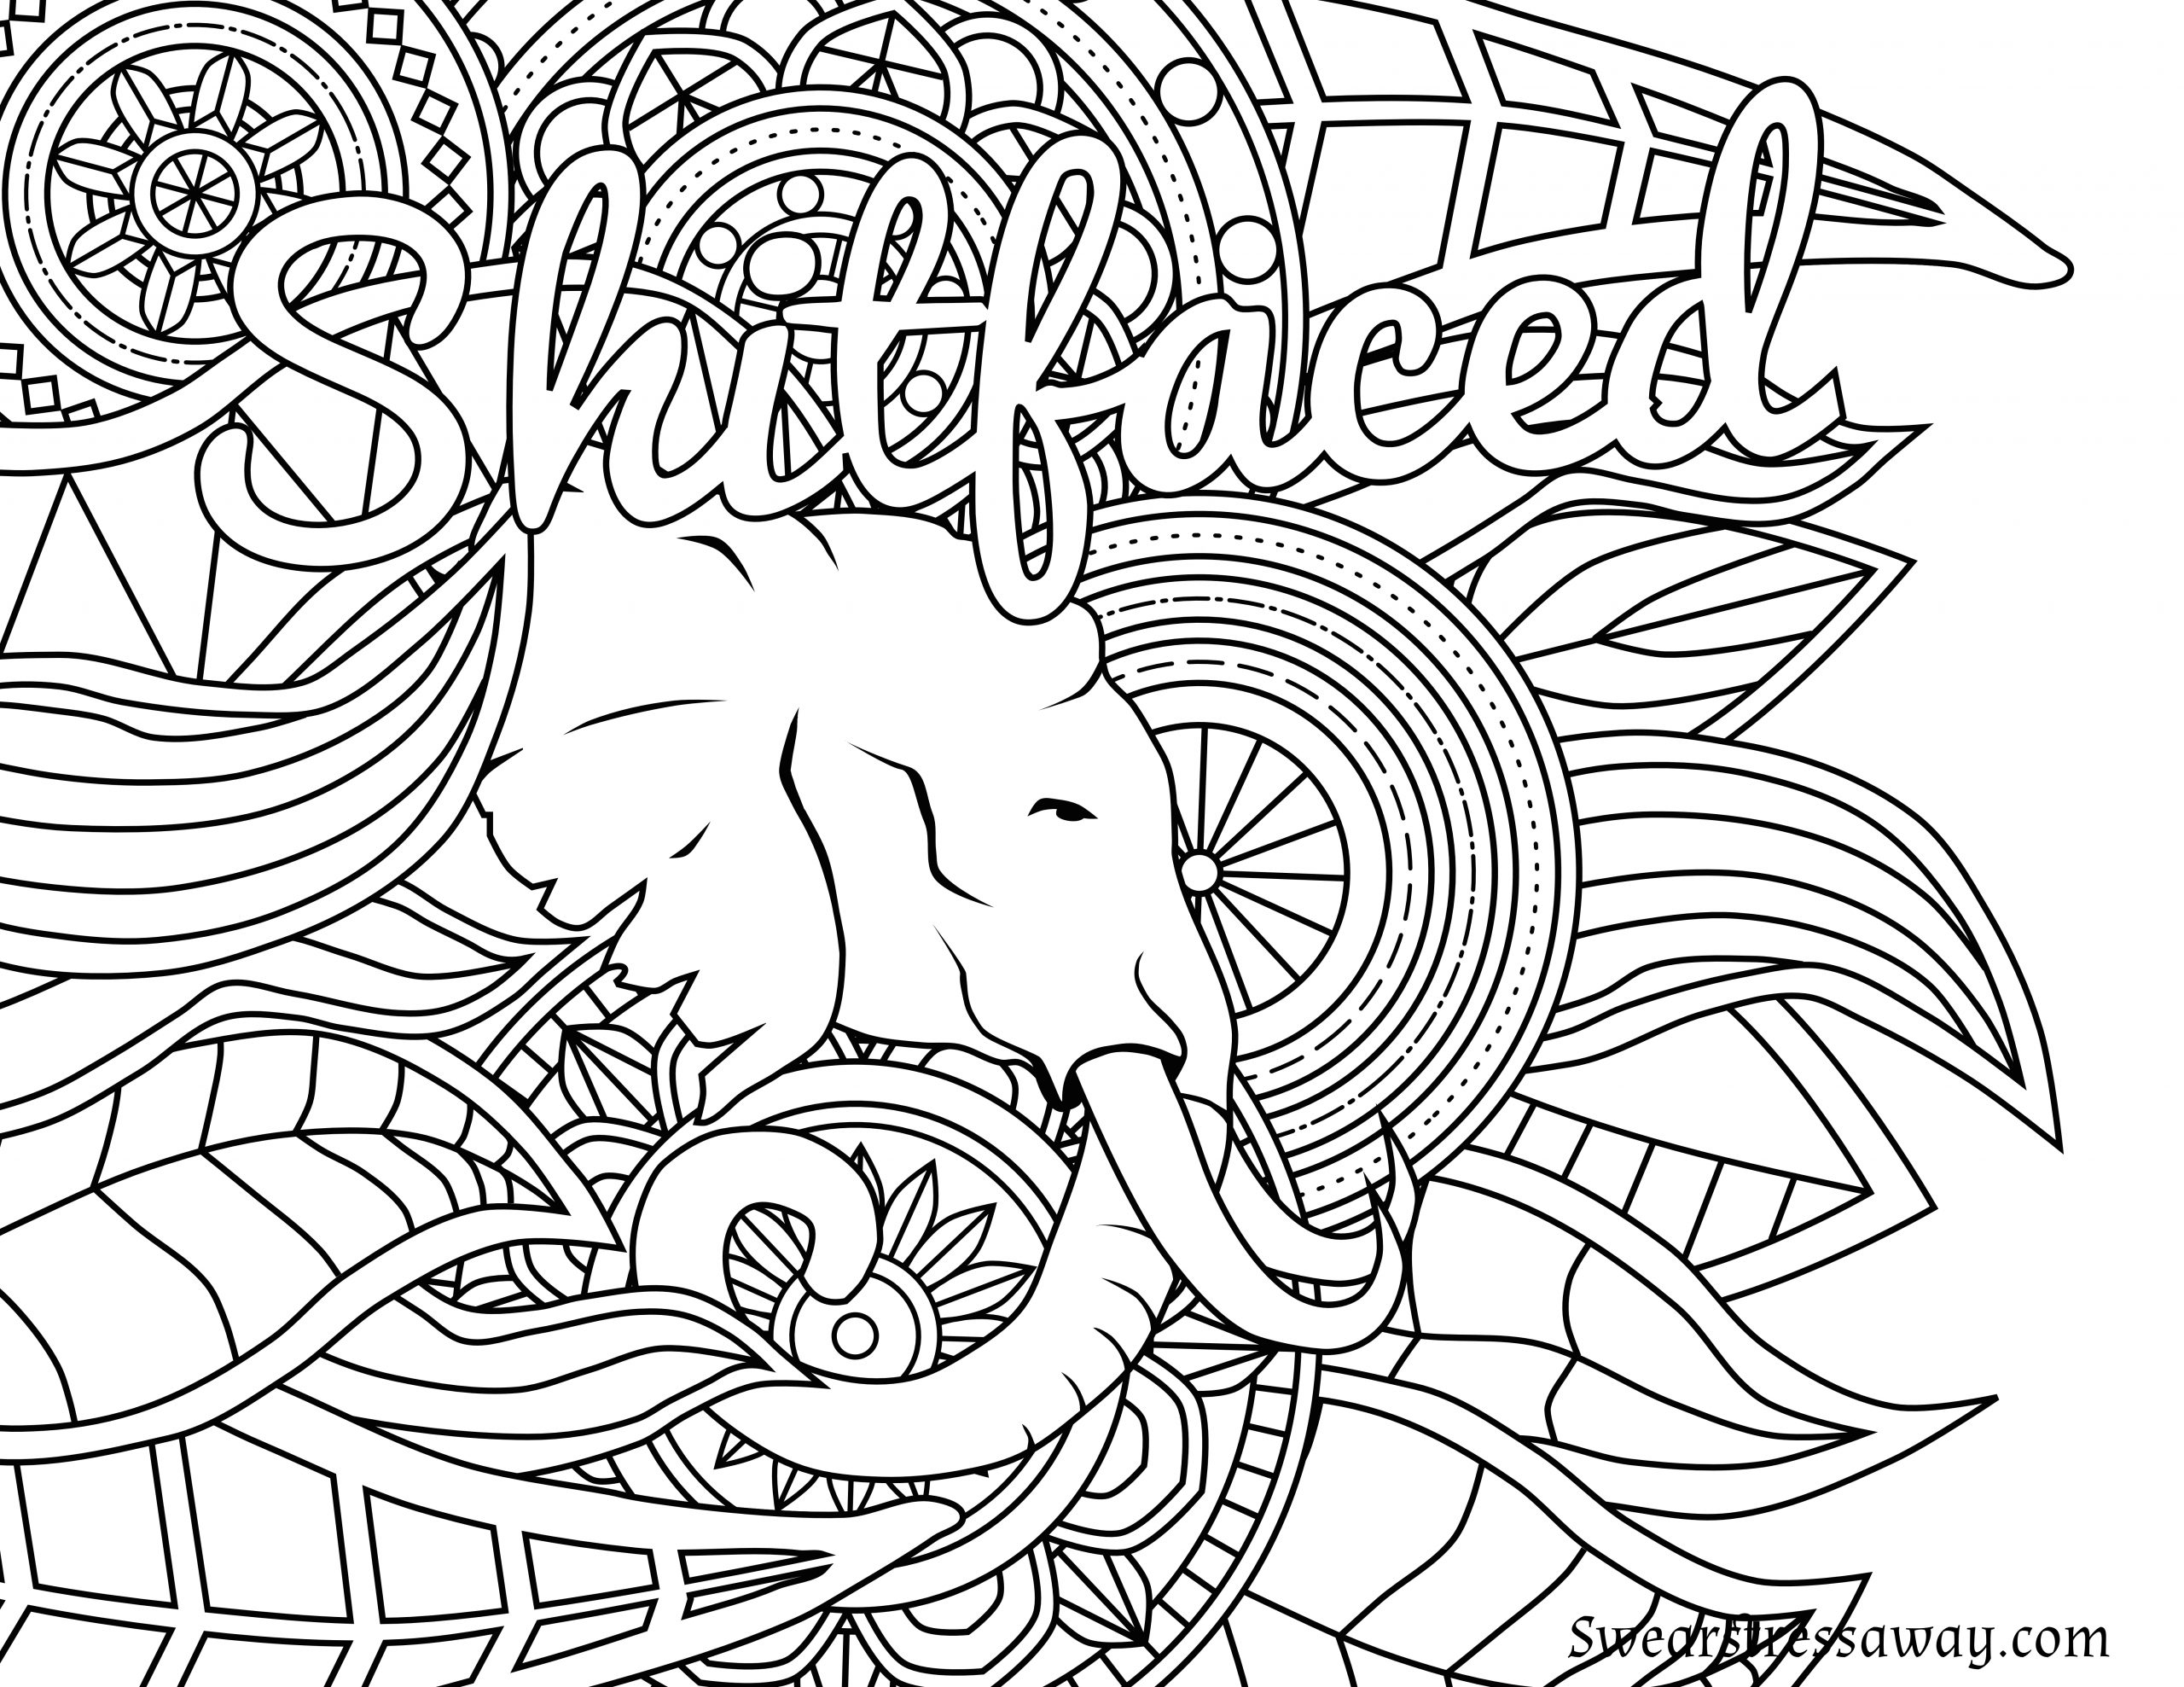 Coloring : Swear Pages Freetable For Kids Cool Young Adult Tot Adults  Outstanding Photo Inspirations Free Printable Worksheets Dragon ~  Americangrassrootscoalition